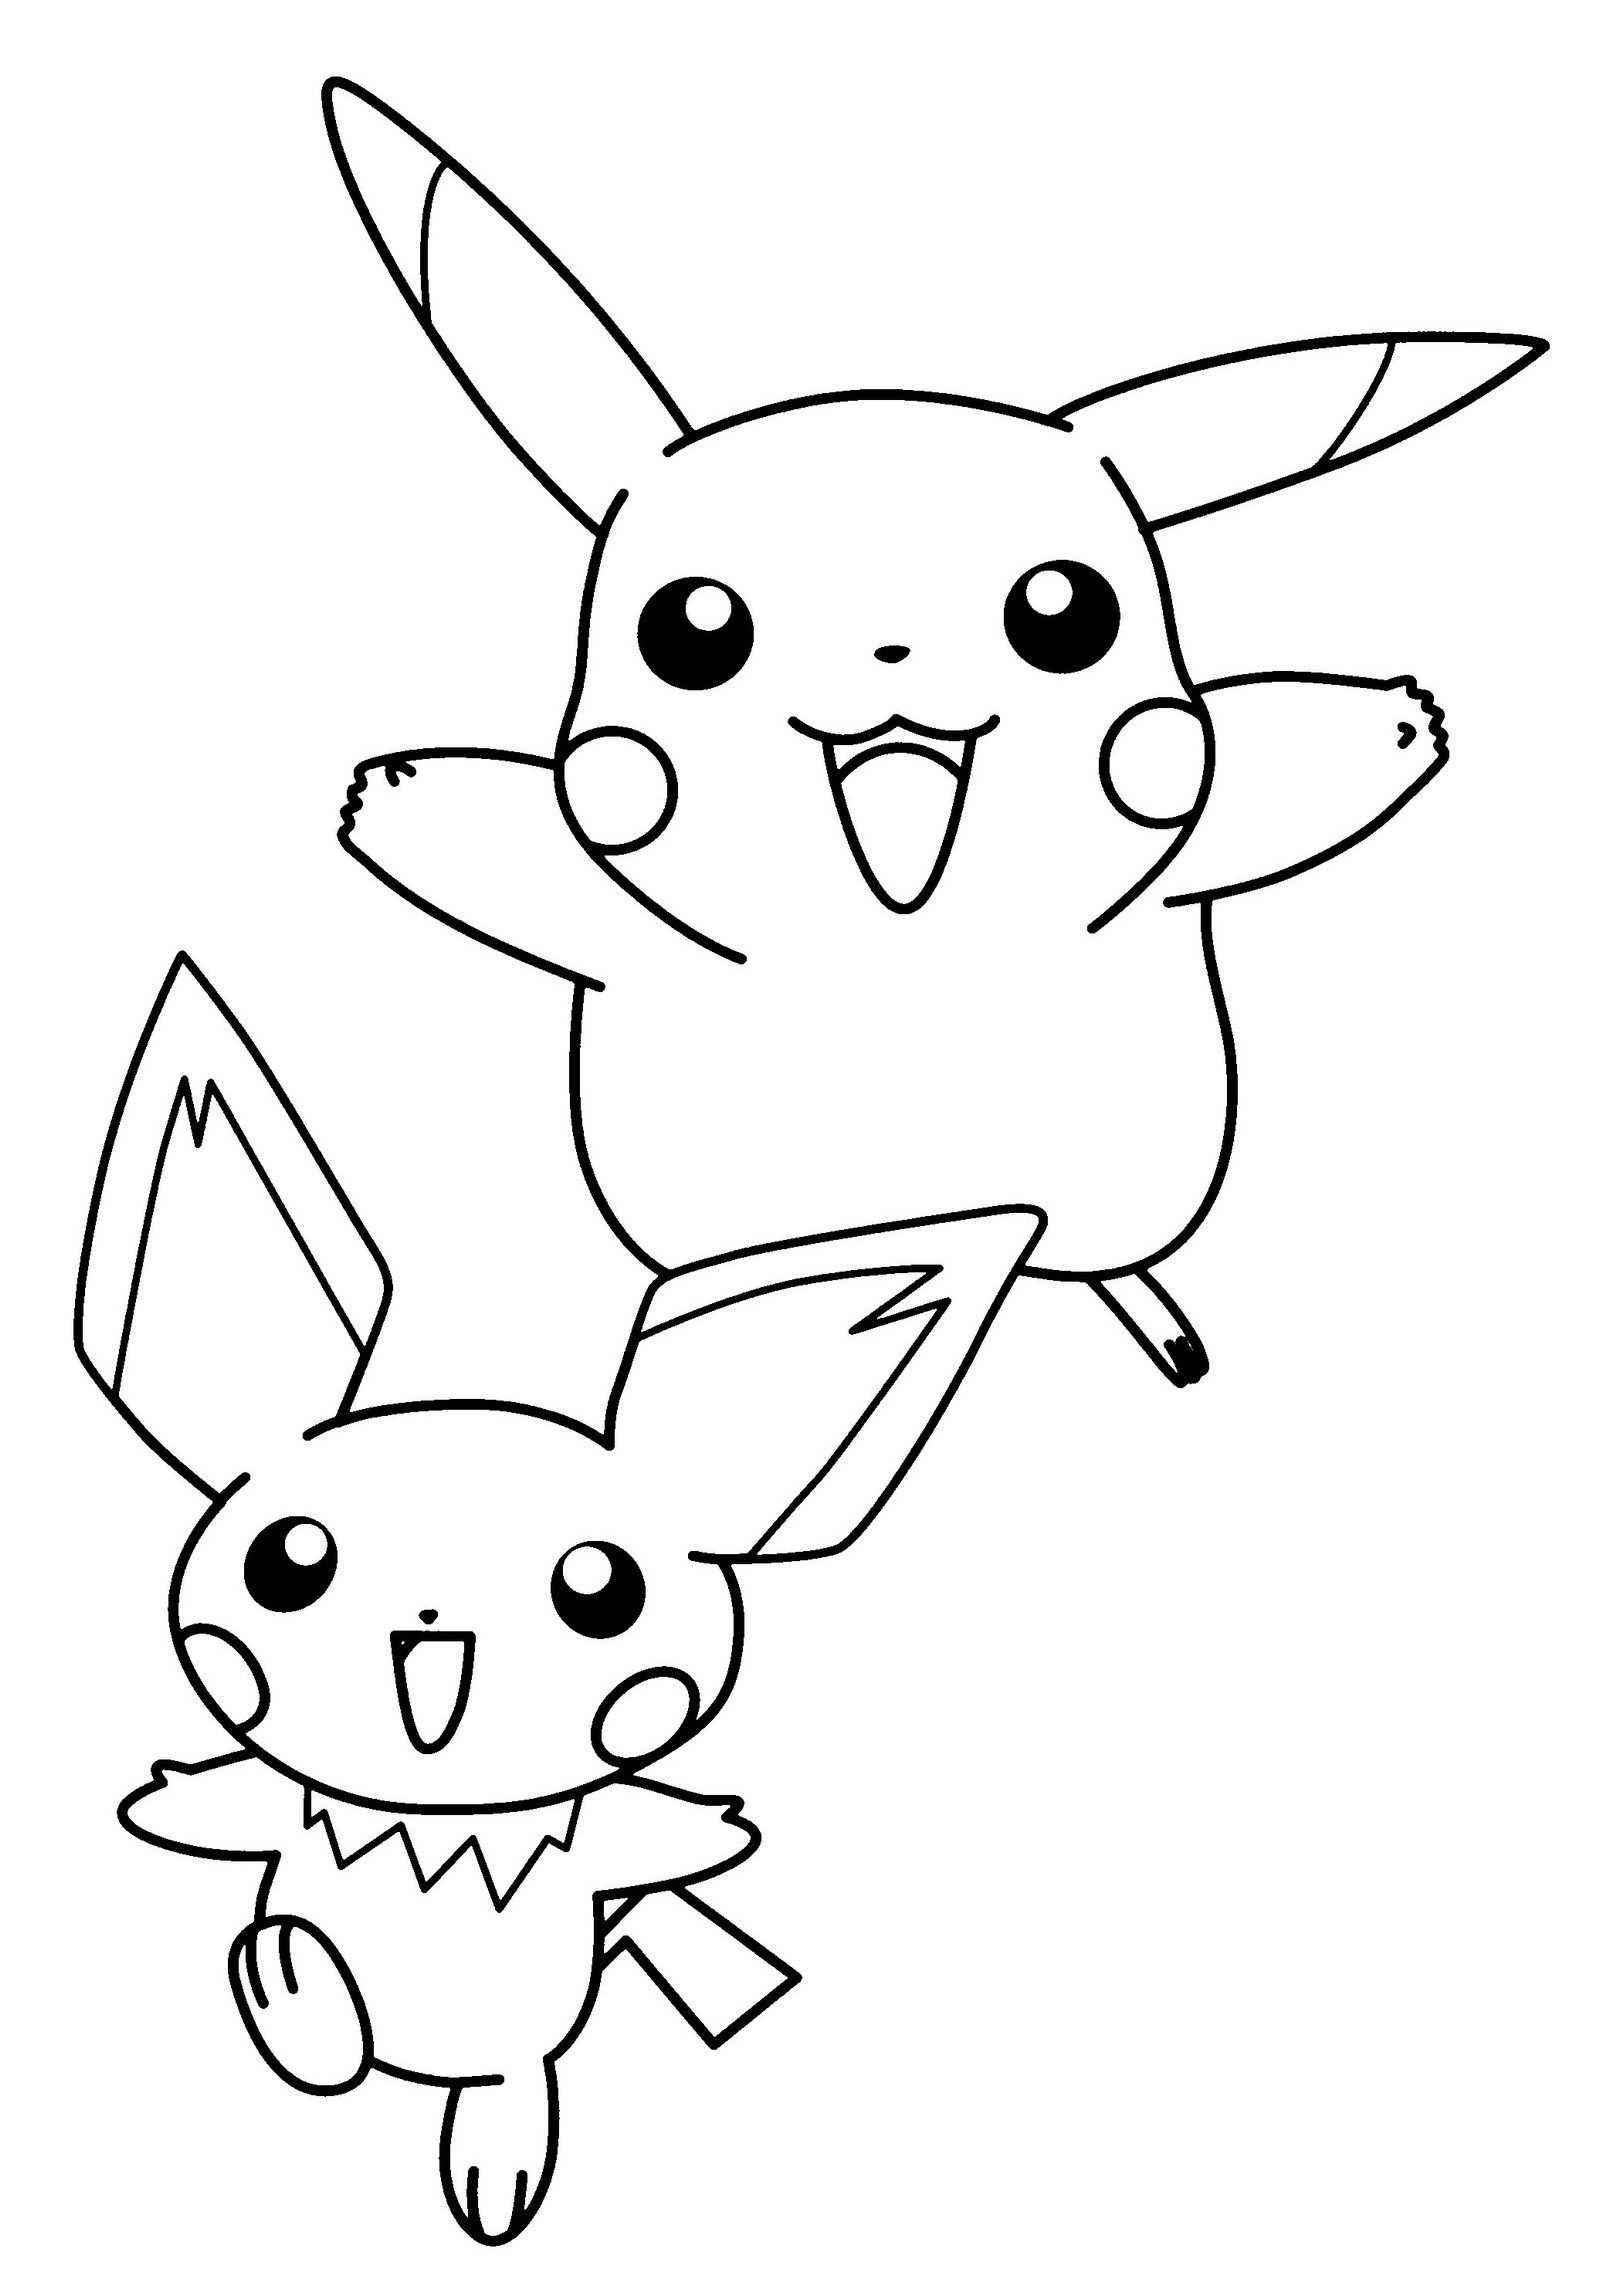 Pikachu Coloring Pages for Kids 126